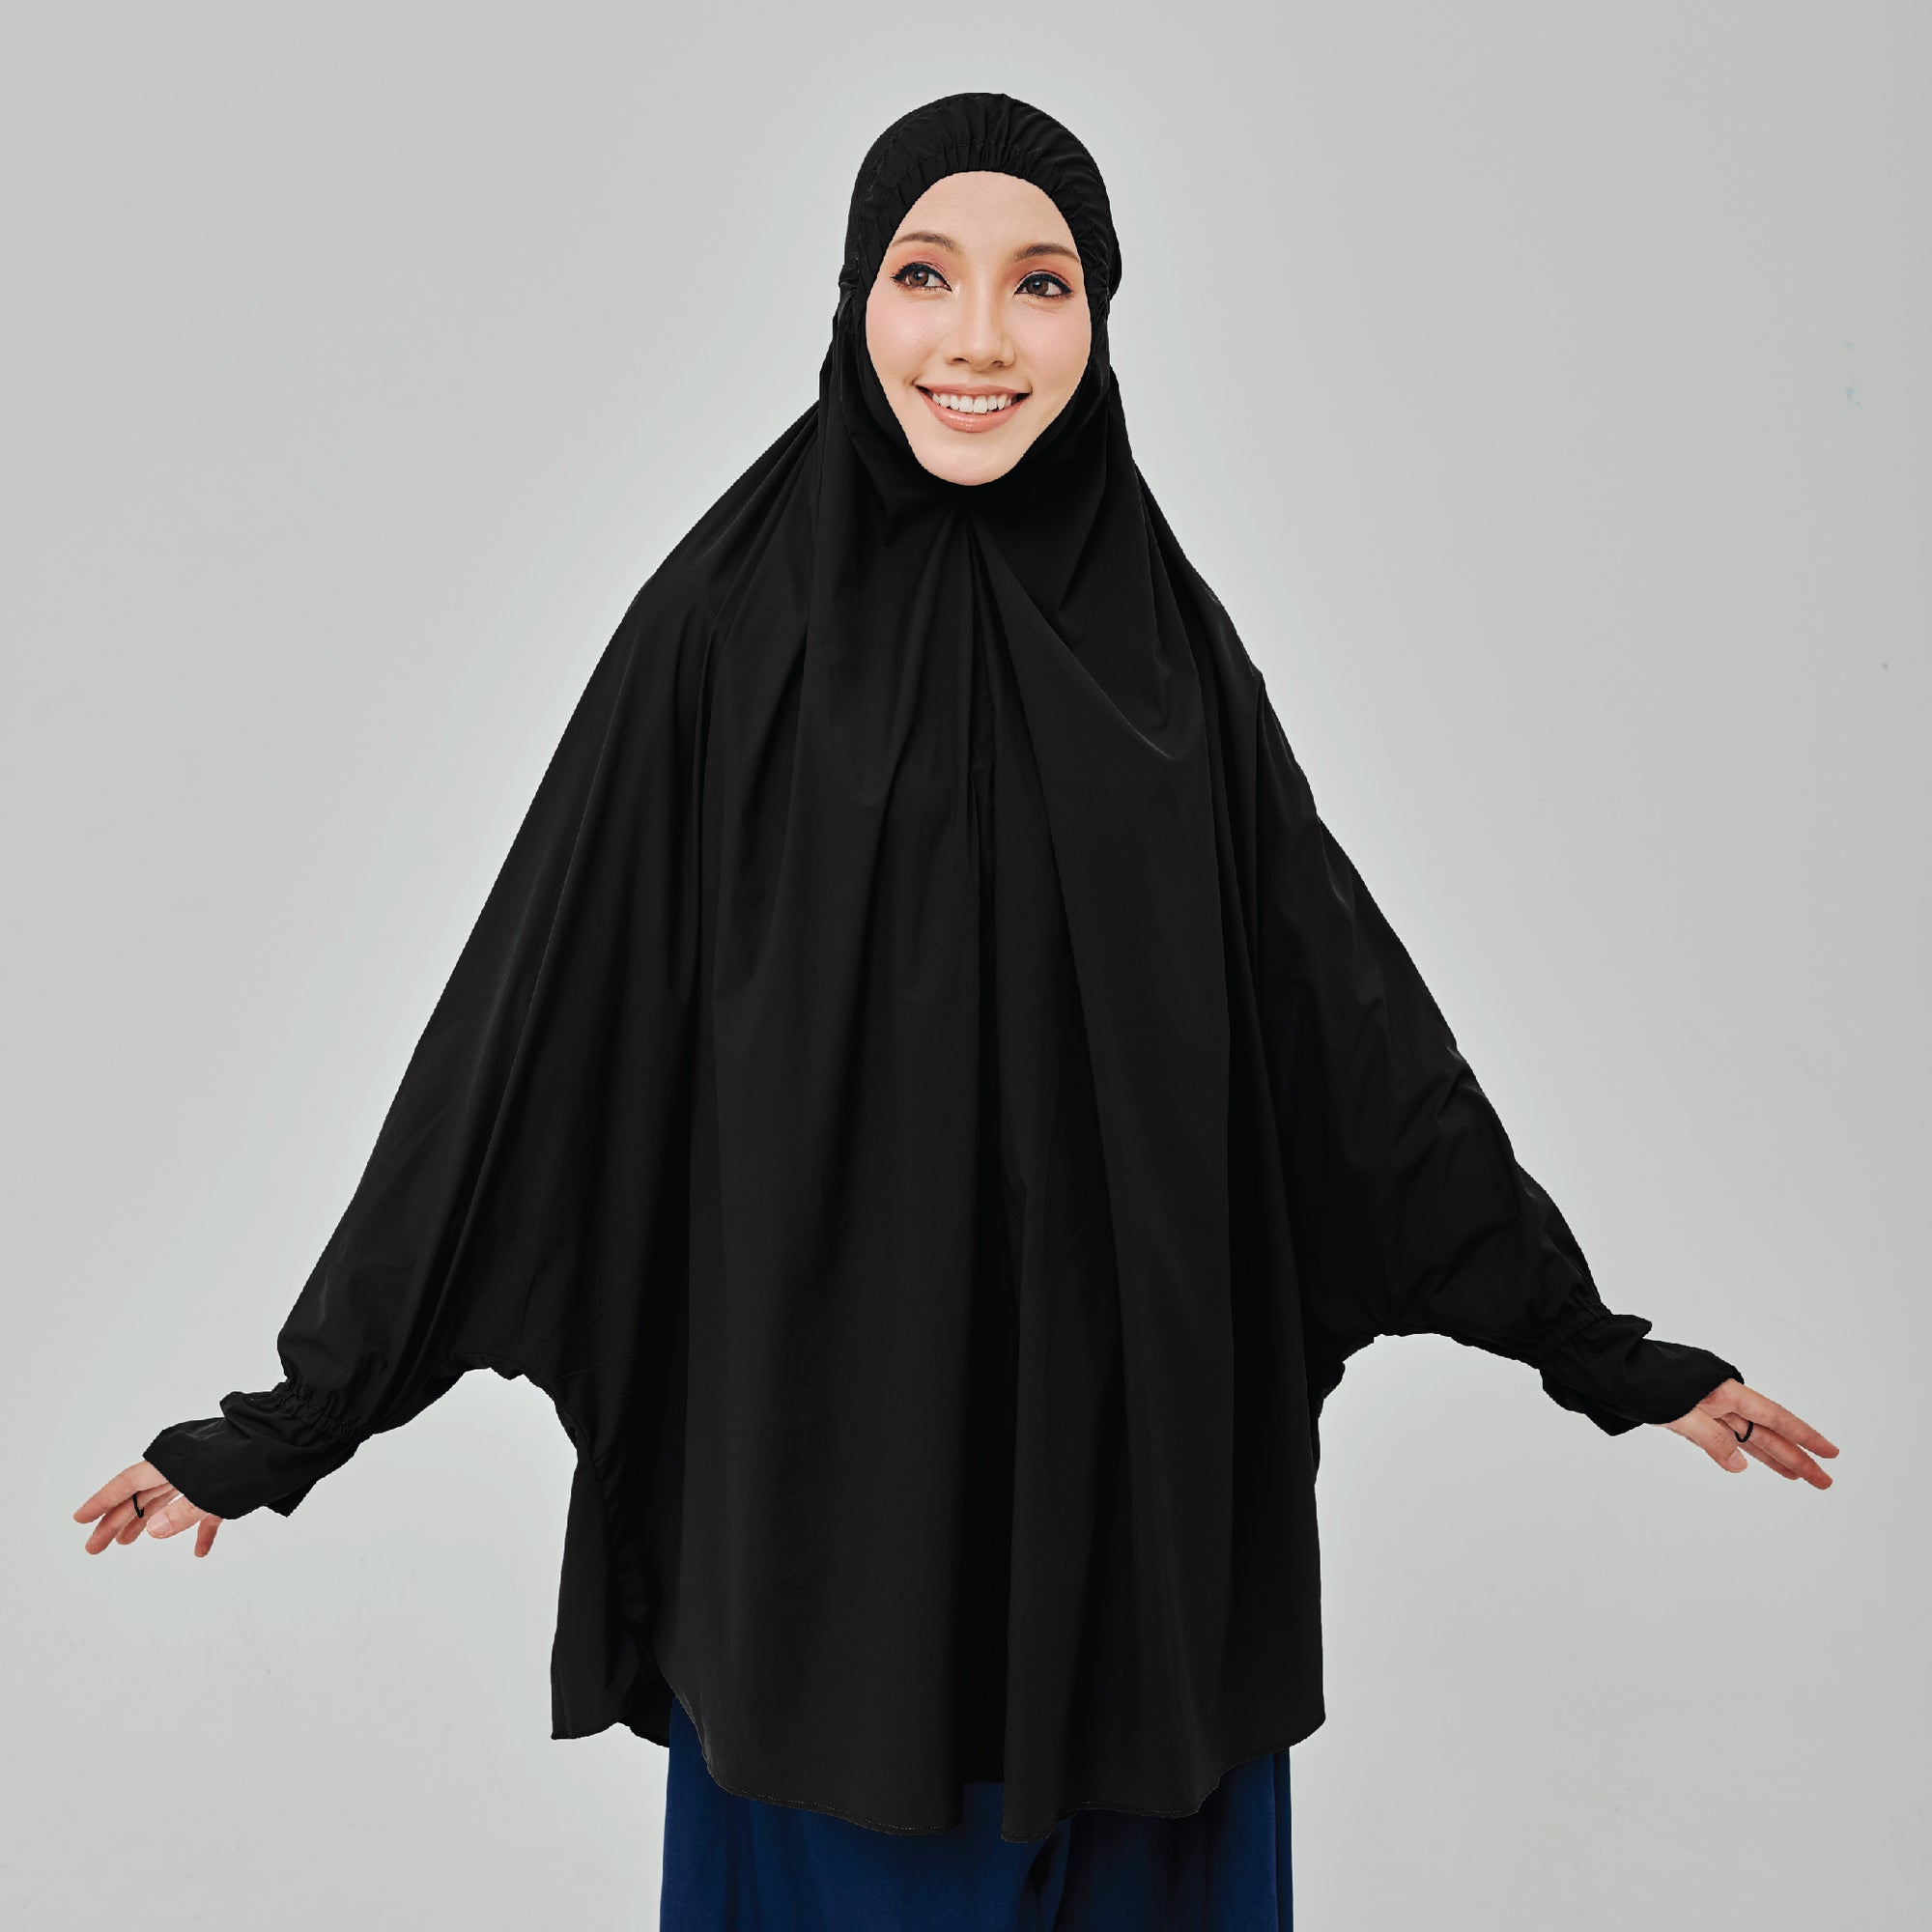 Telekung Marisa is the travel light telekung or prayer wear that can transform your daily prayer while you are mobile or on the go.